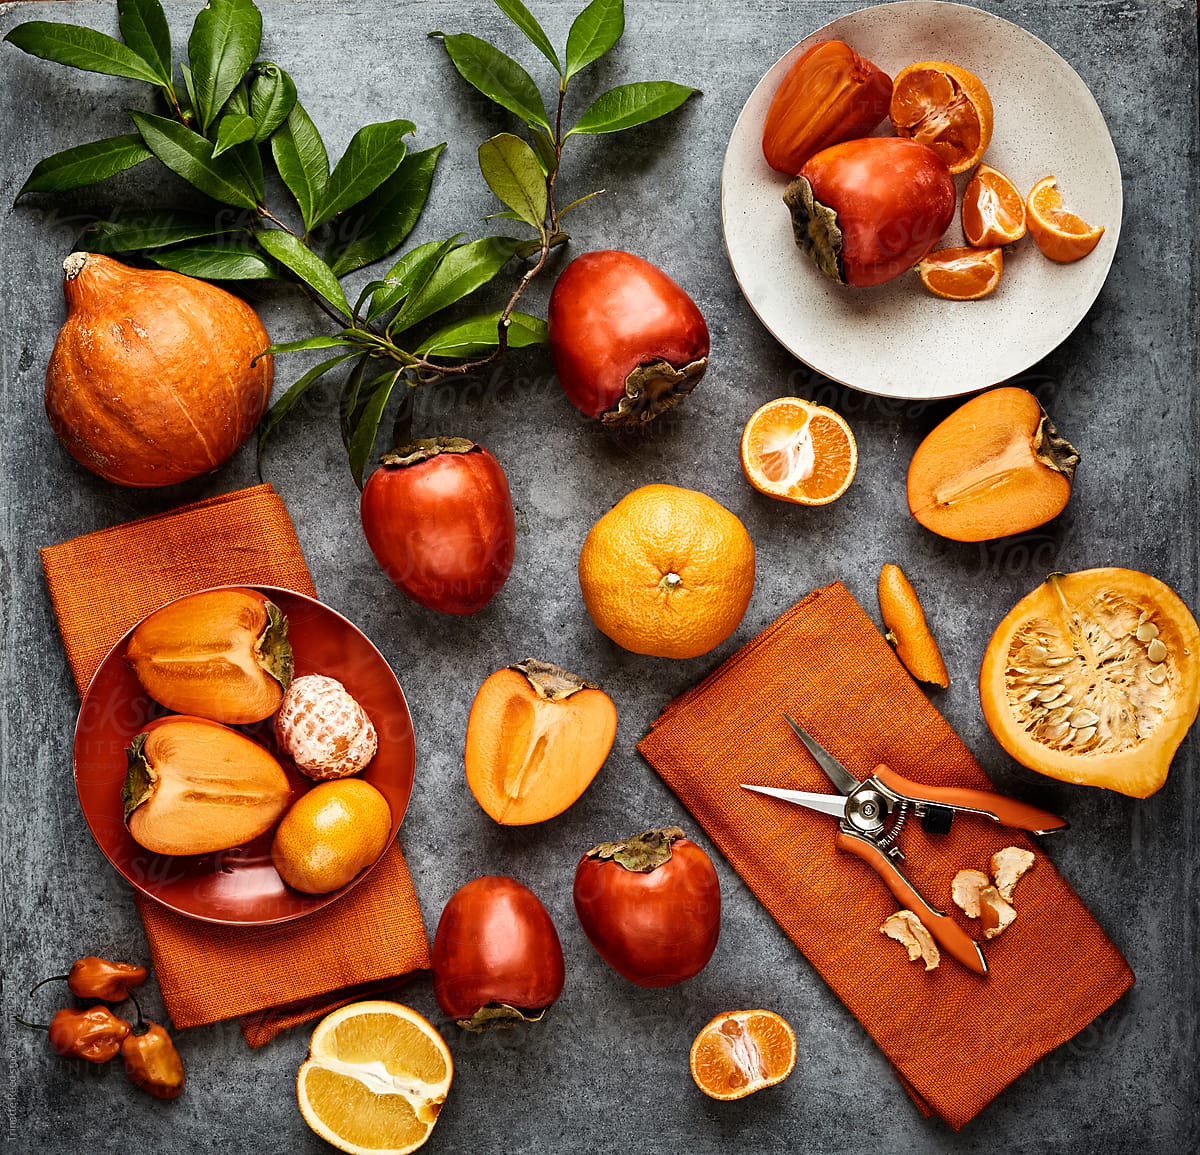 Still life of various orange colored fruits and vegetables on concrete